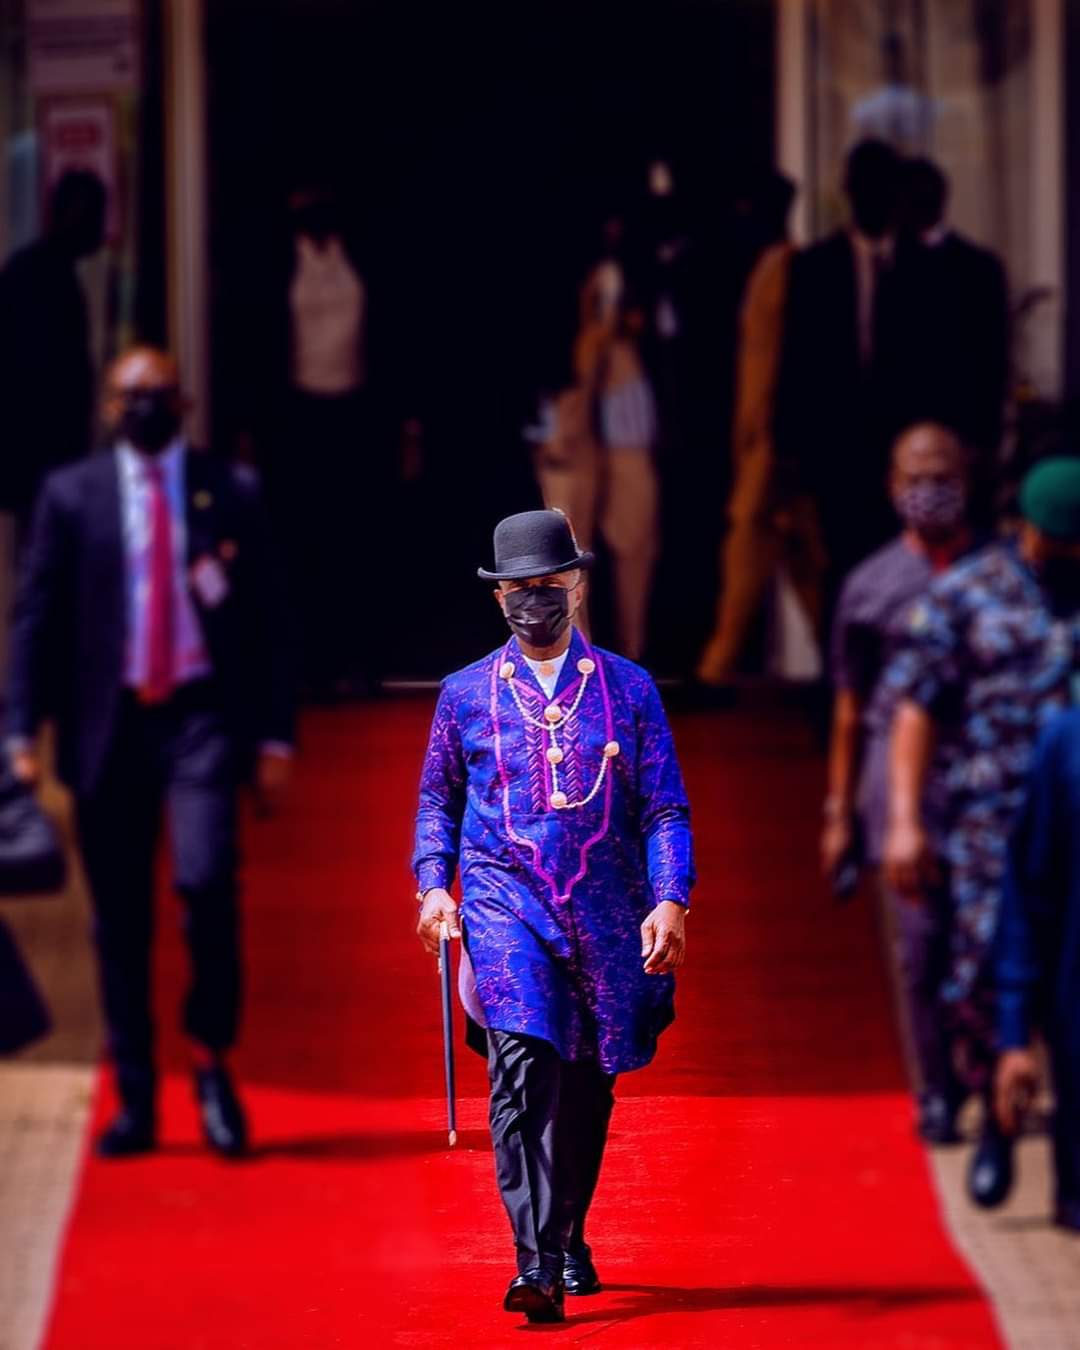 [PHOTOS] Vice President Osinbajo wears Ijaw outfit to flags-off bridge construction in Bayelsa